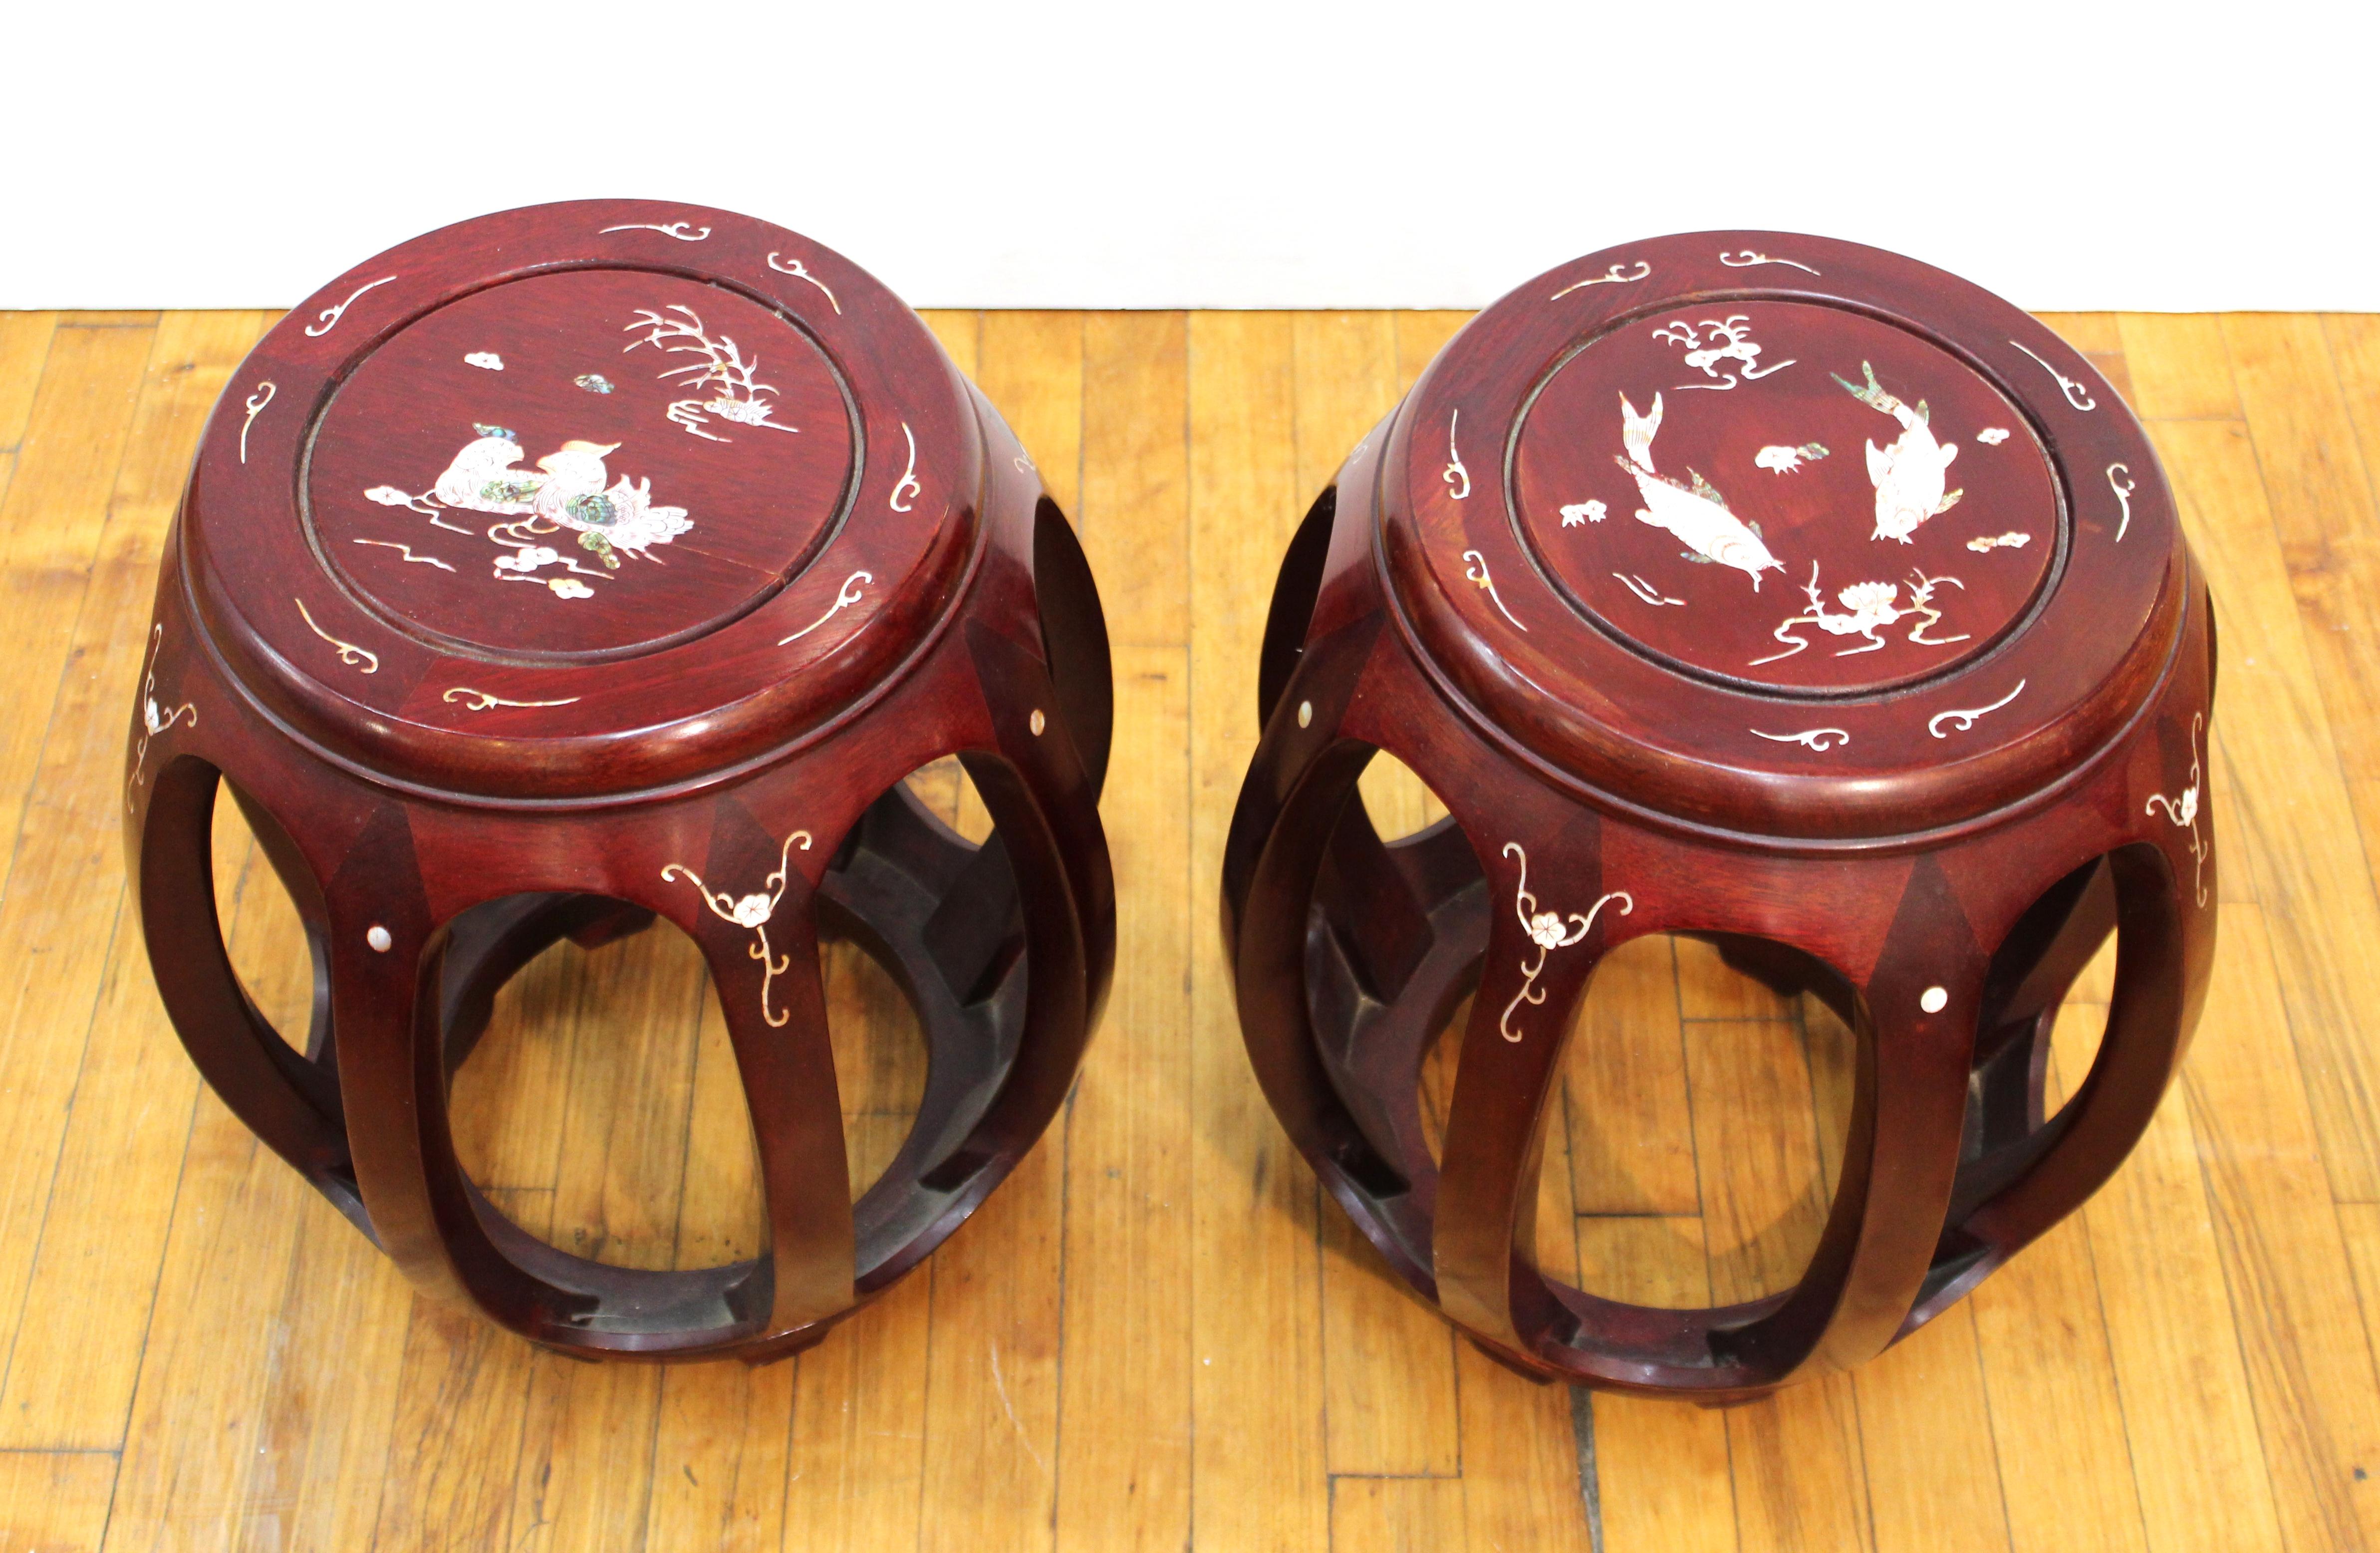 Chinese pair of carved wood garden seats with mother of pearl inlay of decorative birds and fish. The pair is in great vintage condition with age-appropriate wear and use.